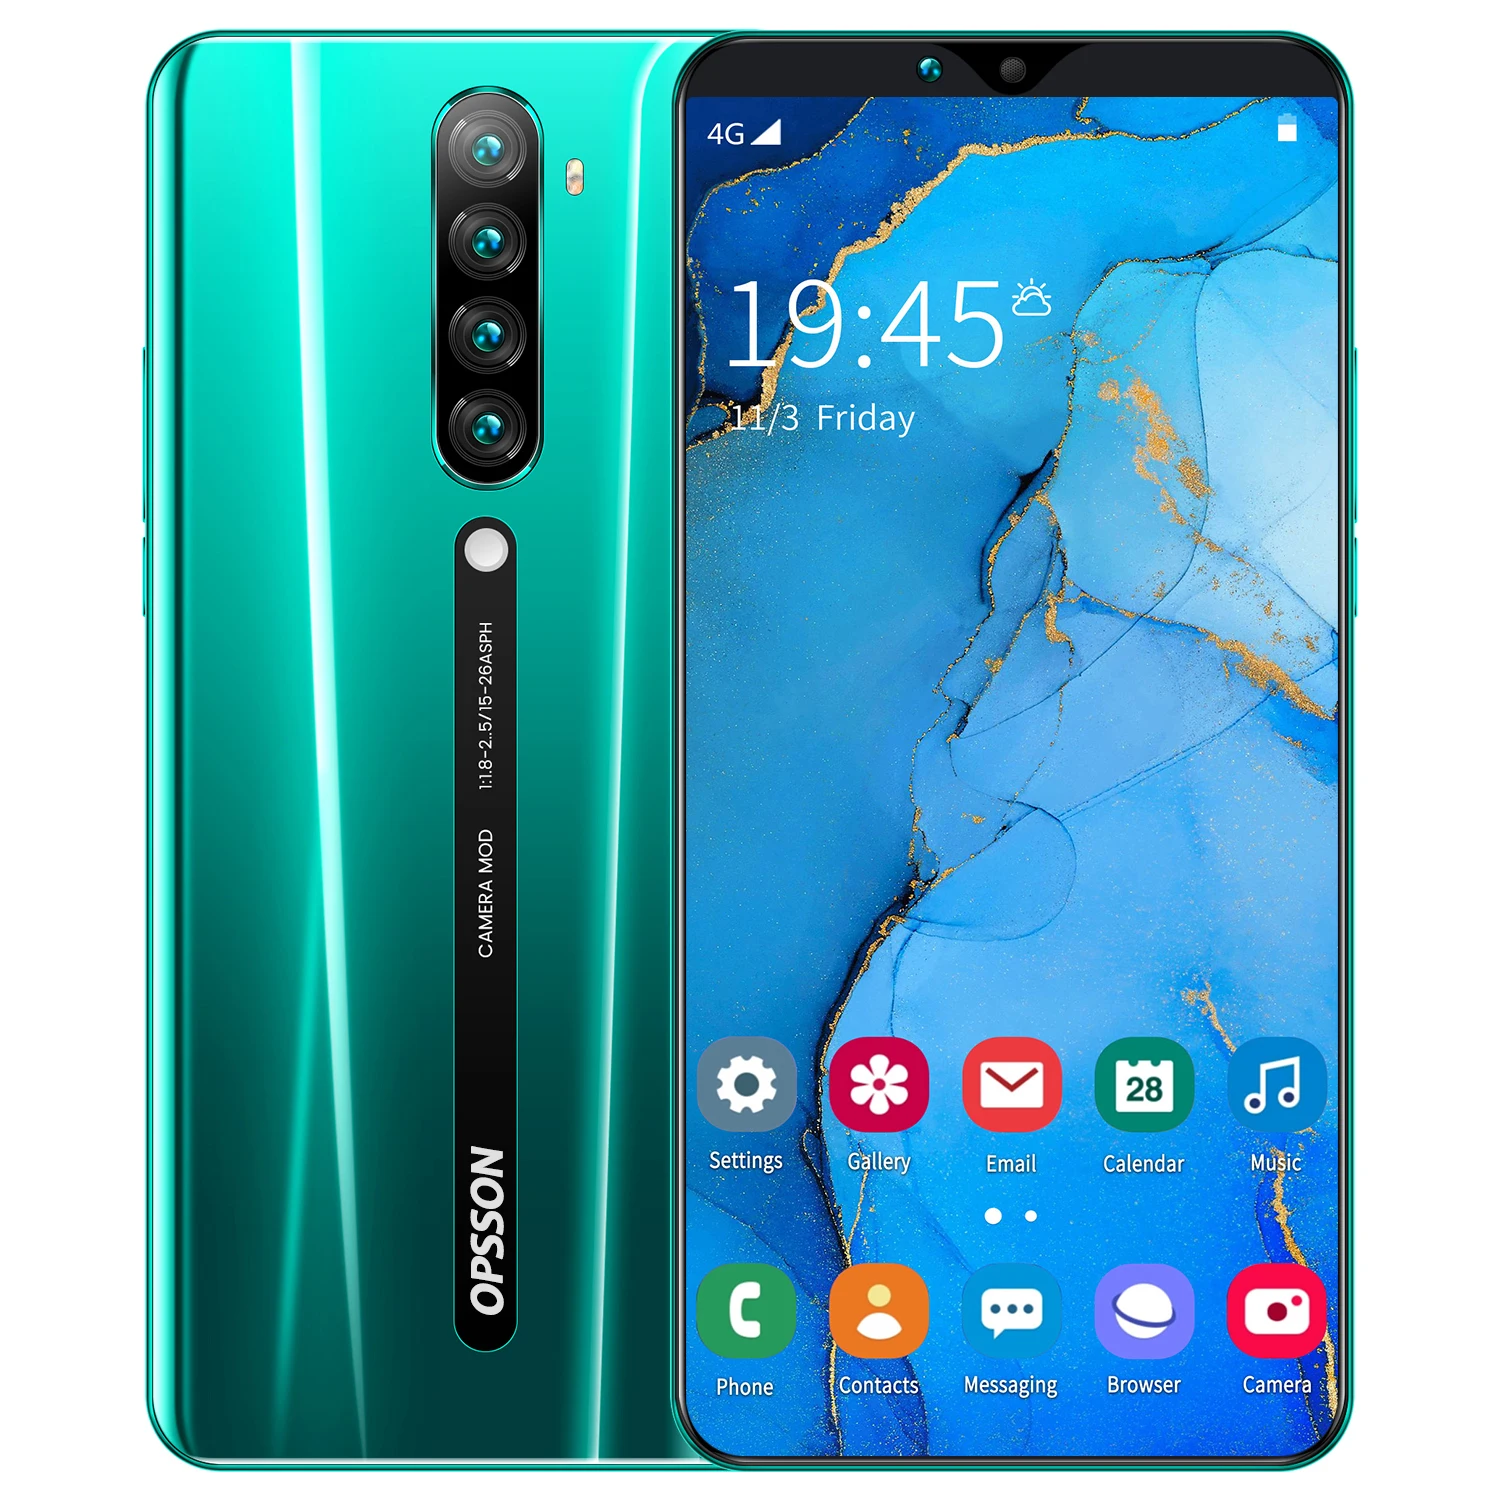 Made In China 6.3 Inch Dual Sim 6g Ram 128gb Rino 5 Pro New Phones Big Screen Android Mobail China - Buy Mobile Phone,Android Phones Lowest Price Max Cellphone